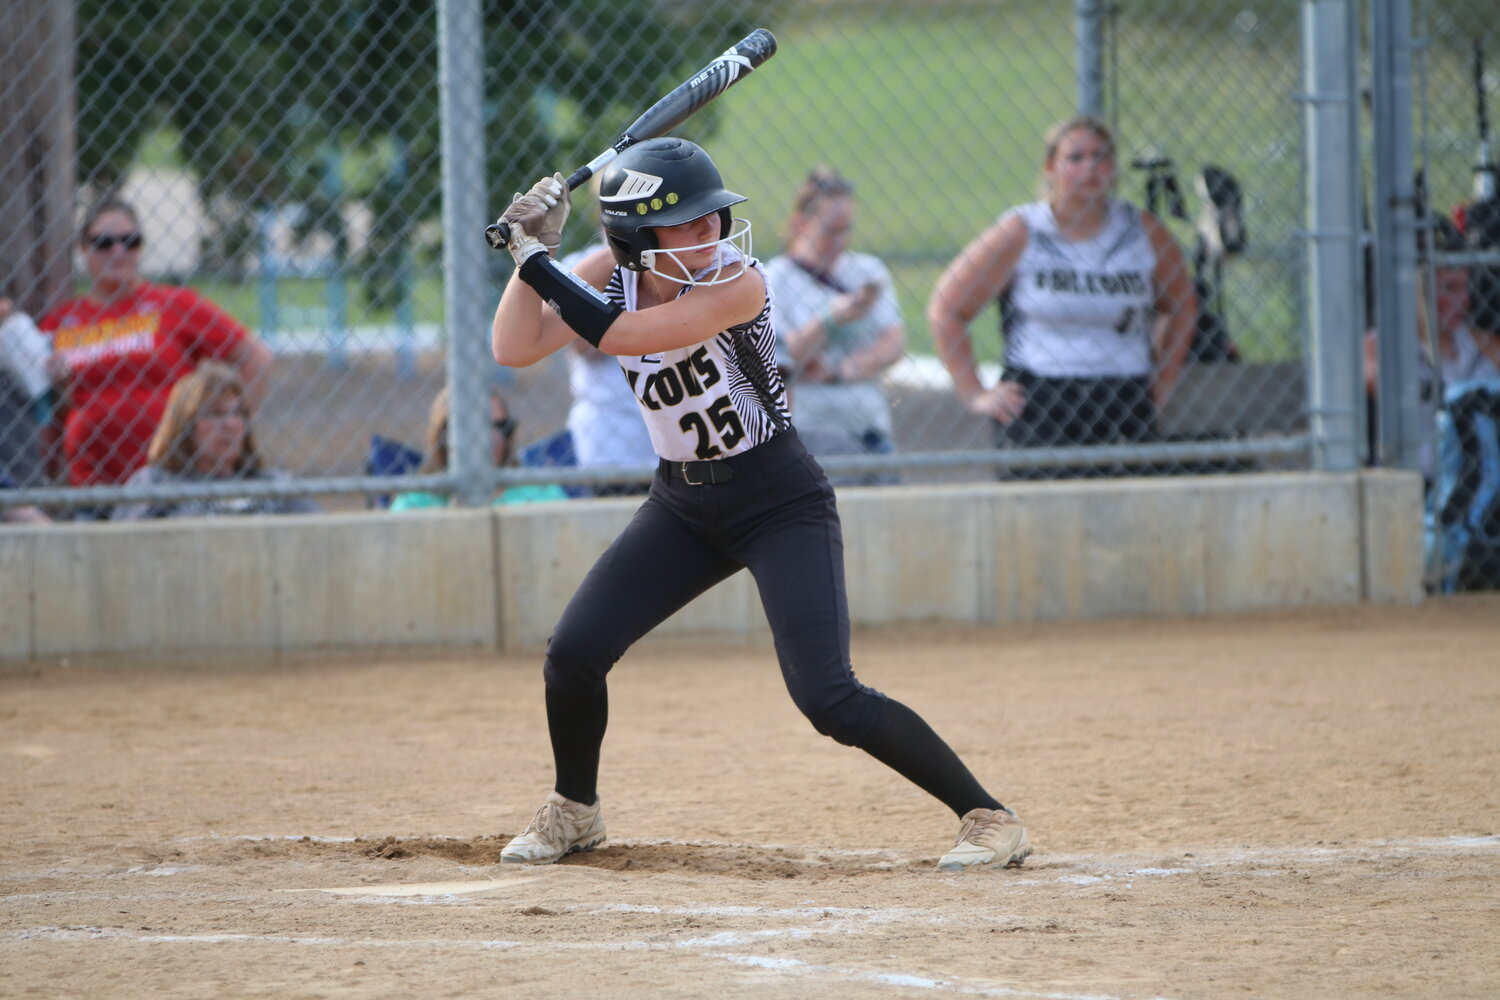 Sophomore Mariah Felten finished 2-for-3 with a run scored.